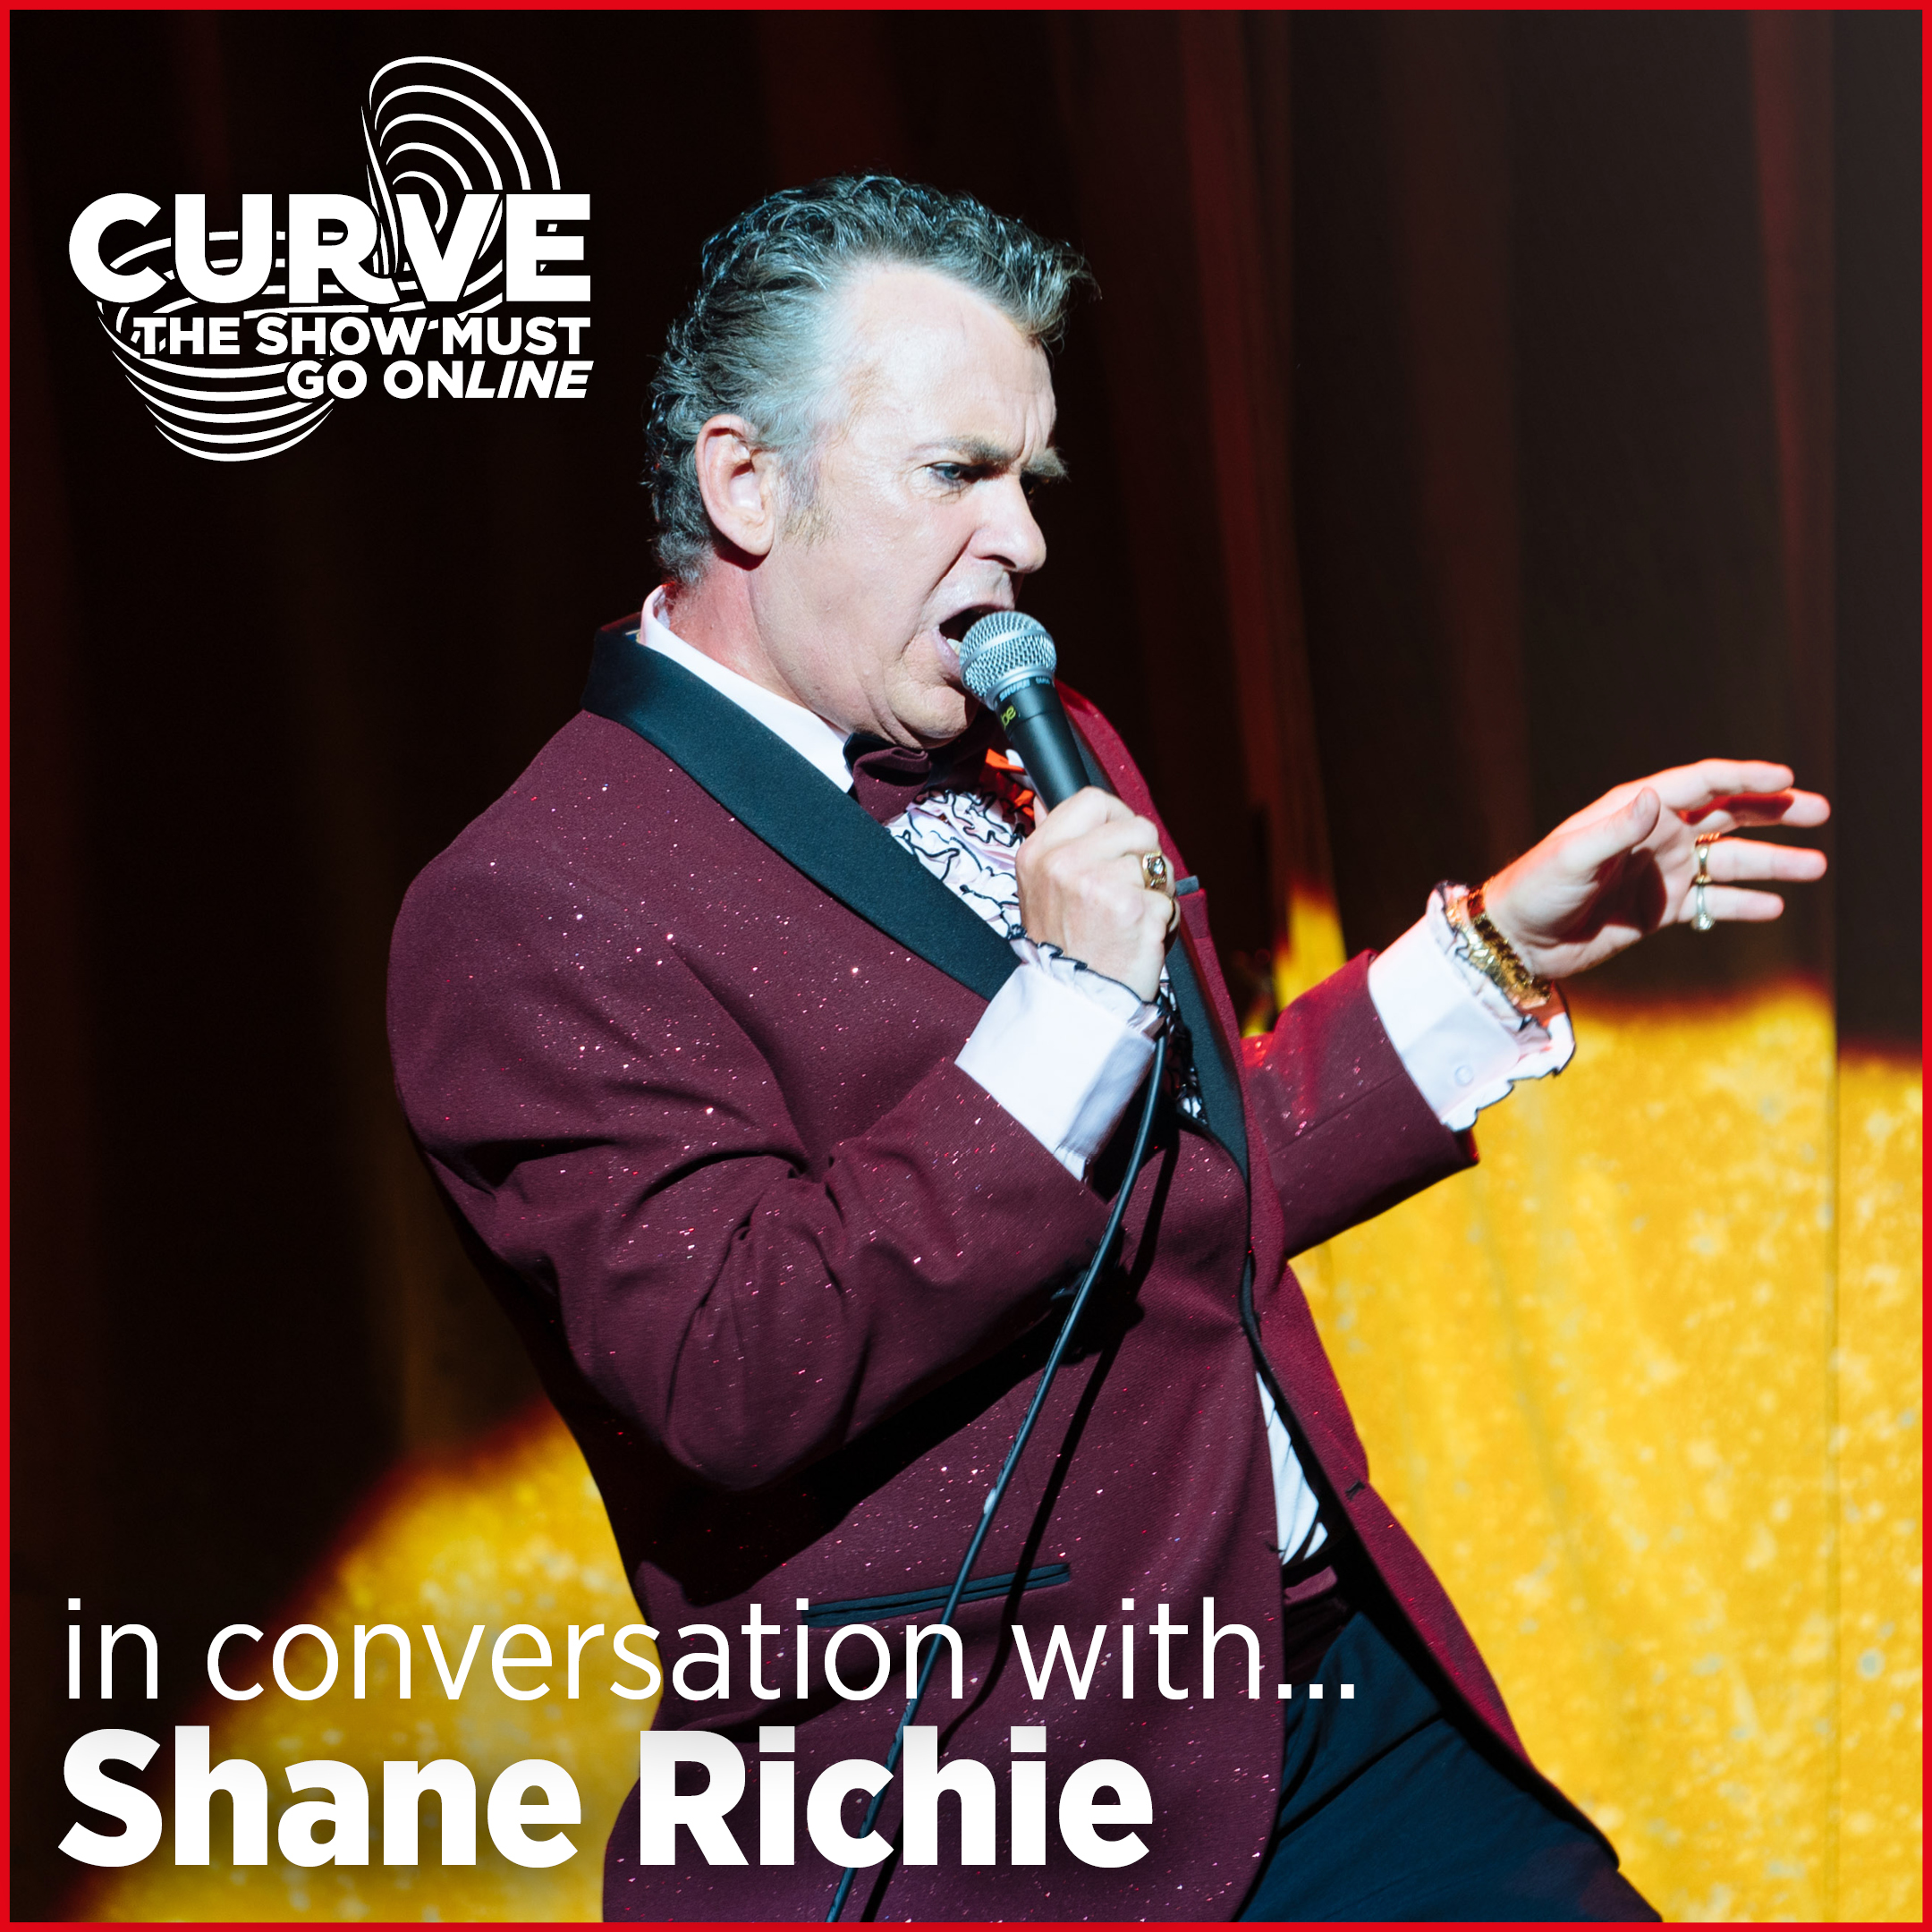 Shane Richie as Archie Rice in The Entertainer, speaking into a microphone.